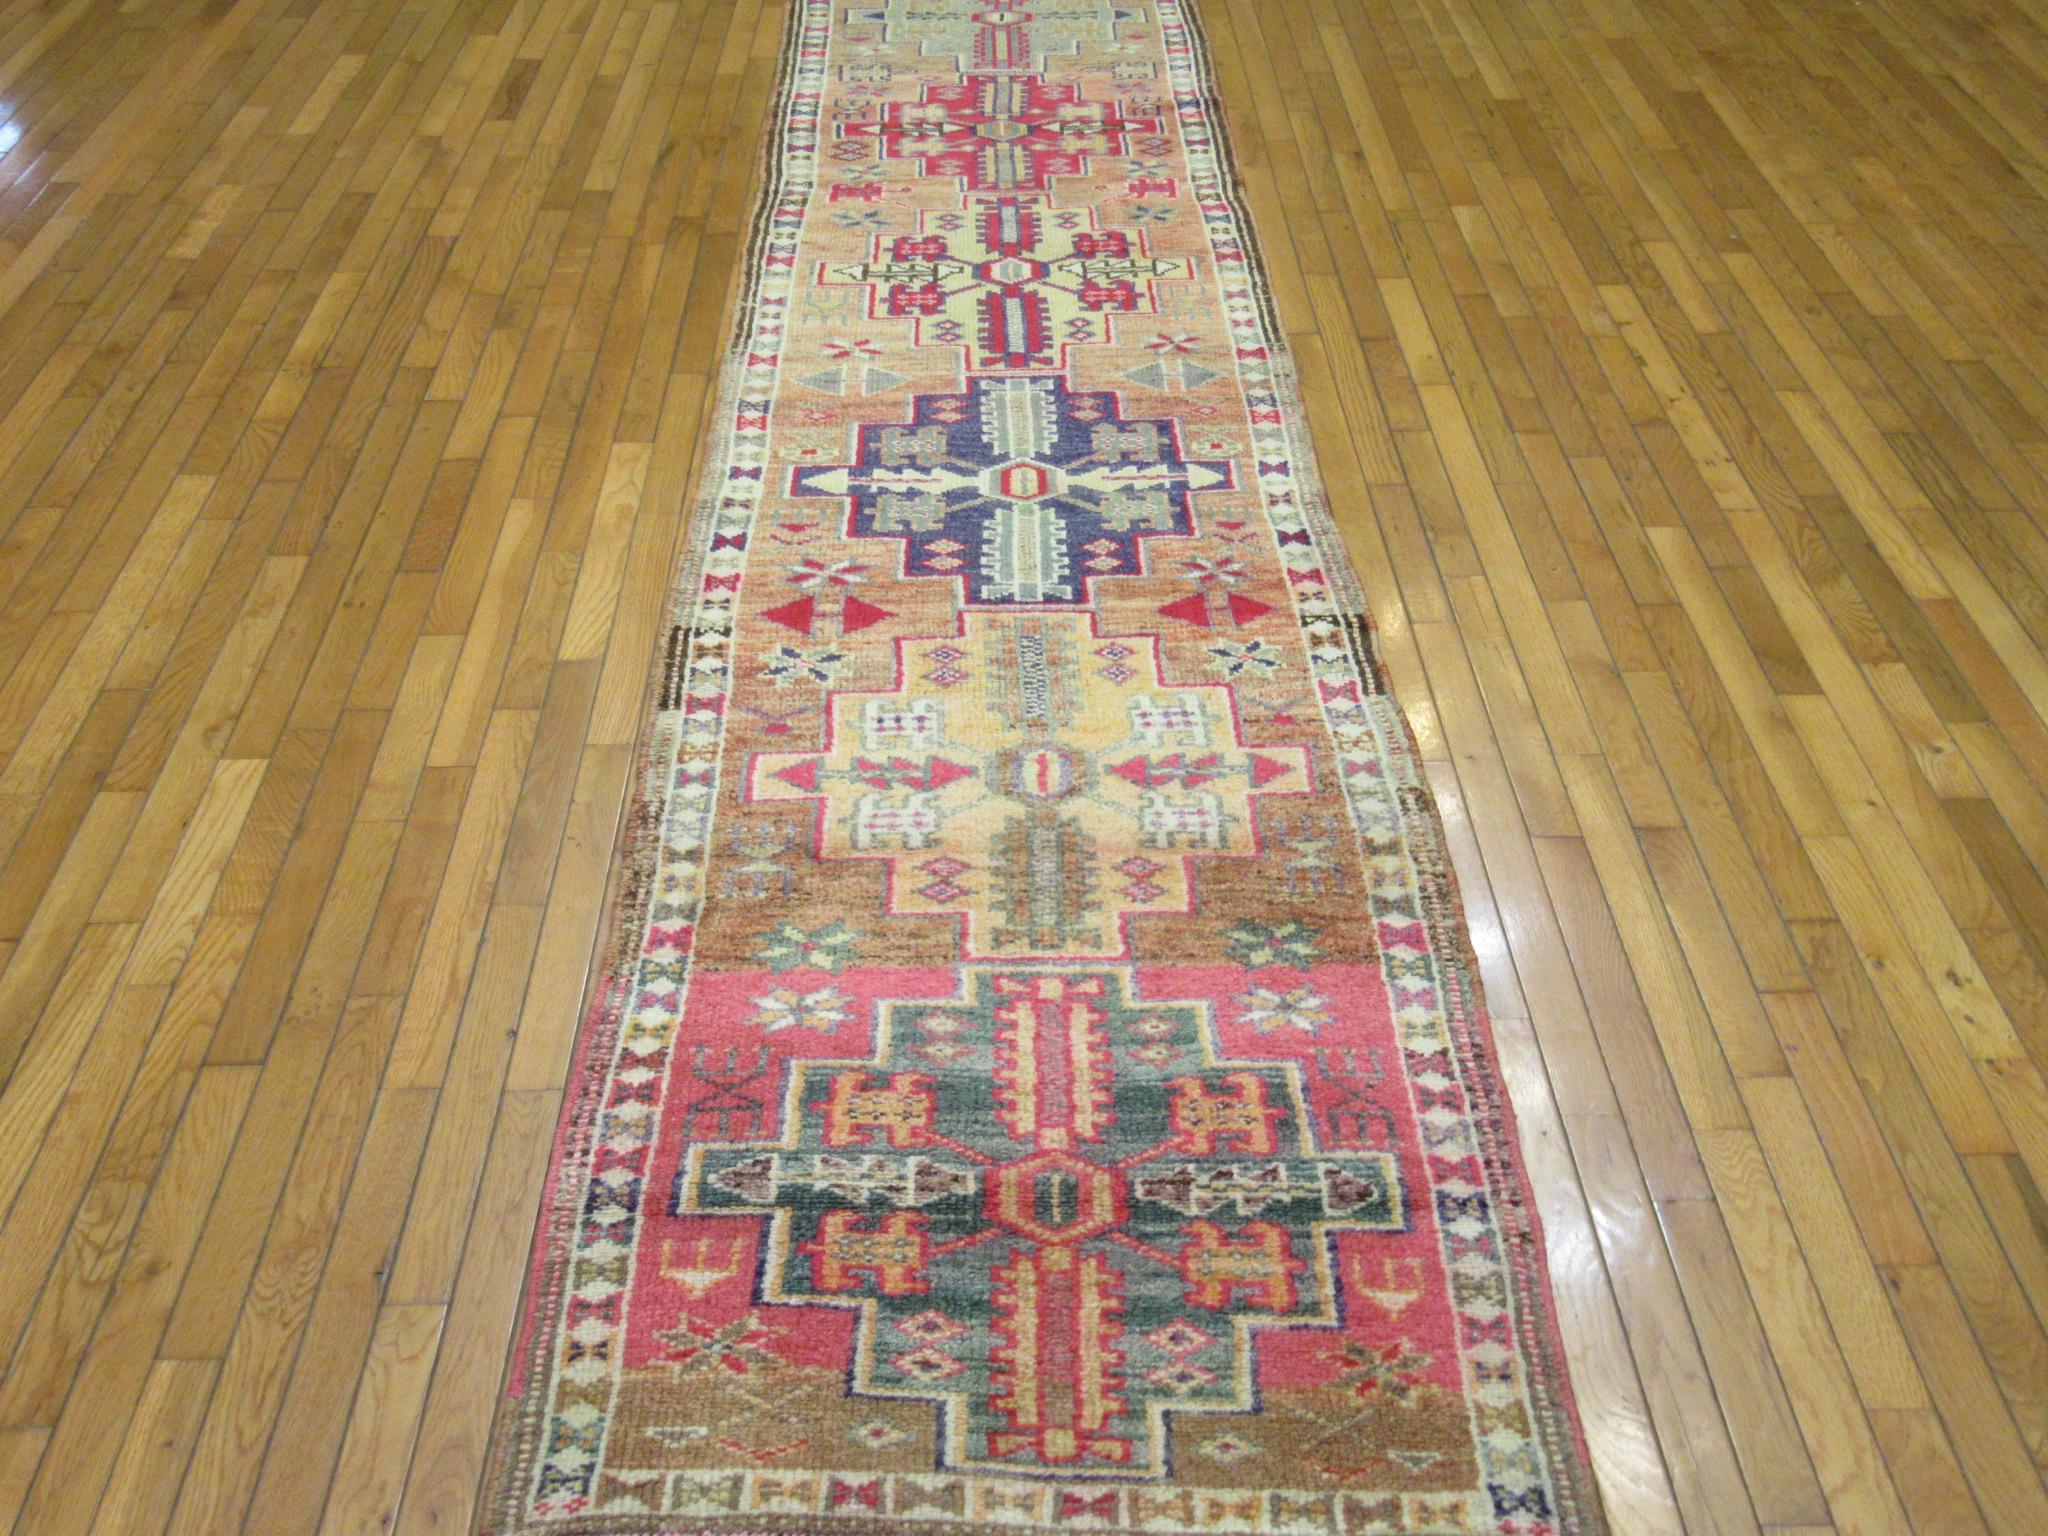 This is a vintage hand knotted Turkish runner rug from the Anatolian region. It is made with wool in a simple tribal pattern. This runner would enhance the look of any hall or space. It measures 2' 9'' x 13' 9'' and in great condition.